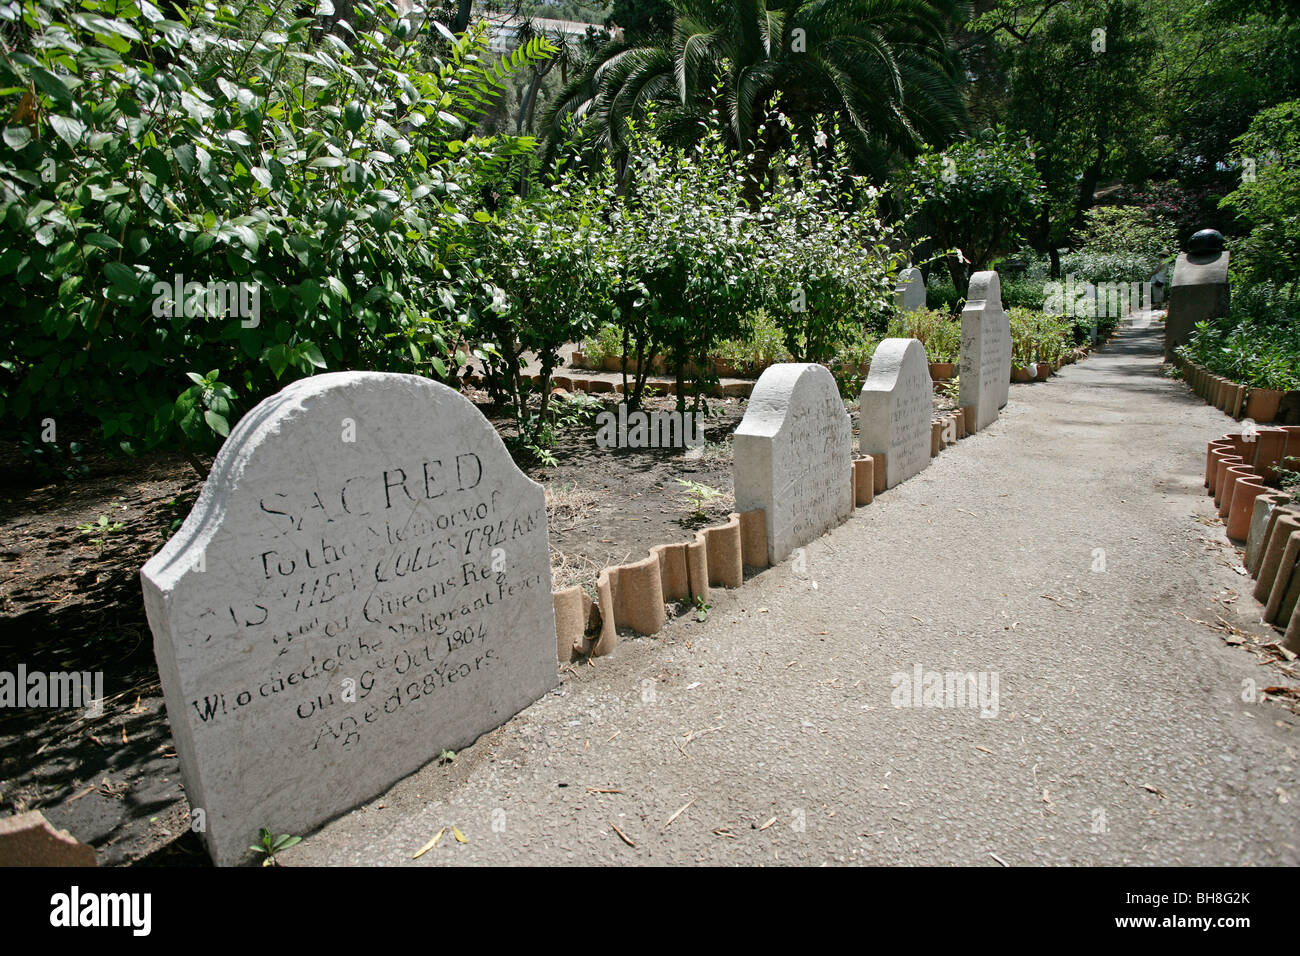 The headstone of a sailor in Trafalgar Cemetery in Gibraltar, England's small territory in the Mediterranean. Stock Photo